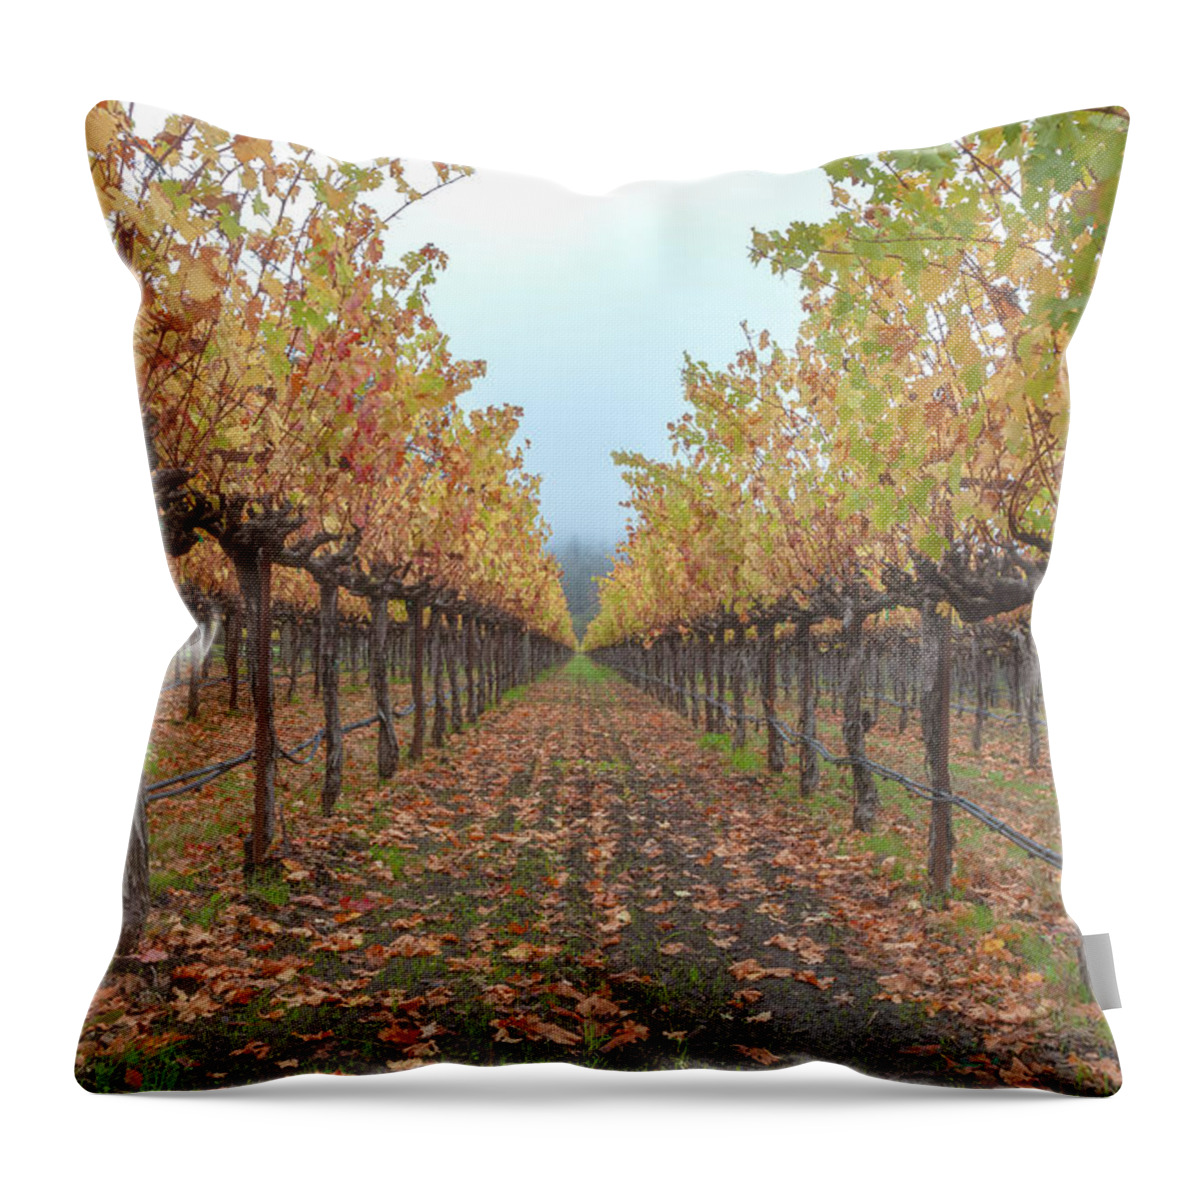 Season Throw Pillow featuring the photograph Vines Forest by Jonathan Nguyen